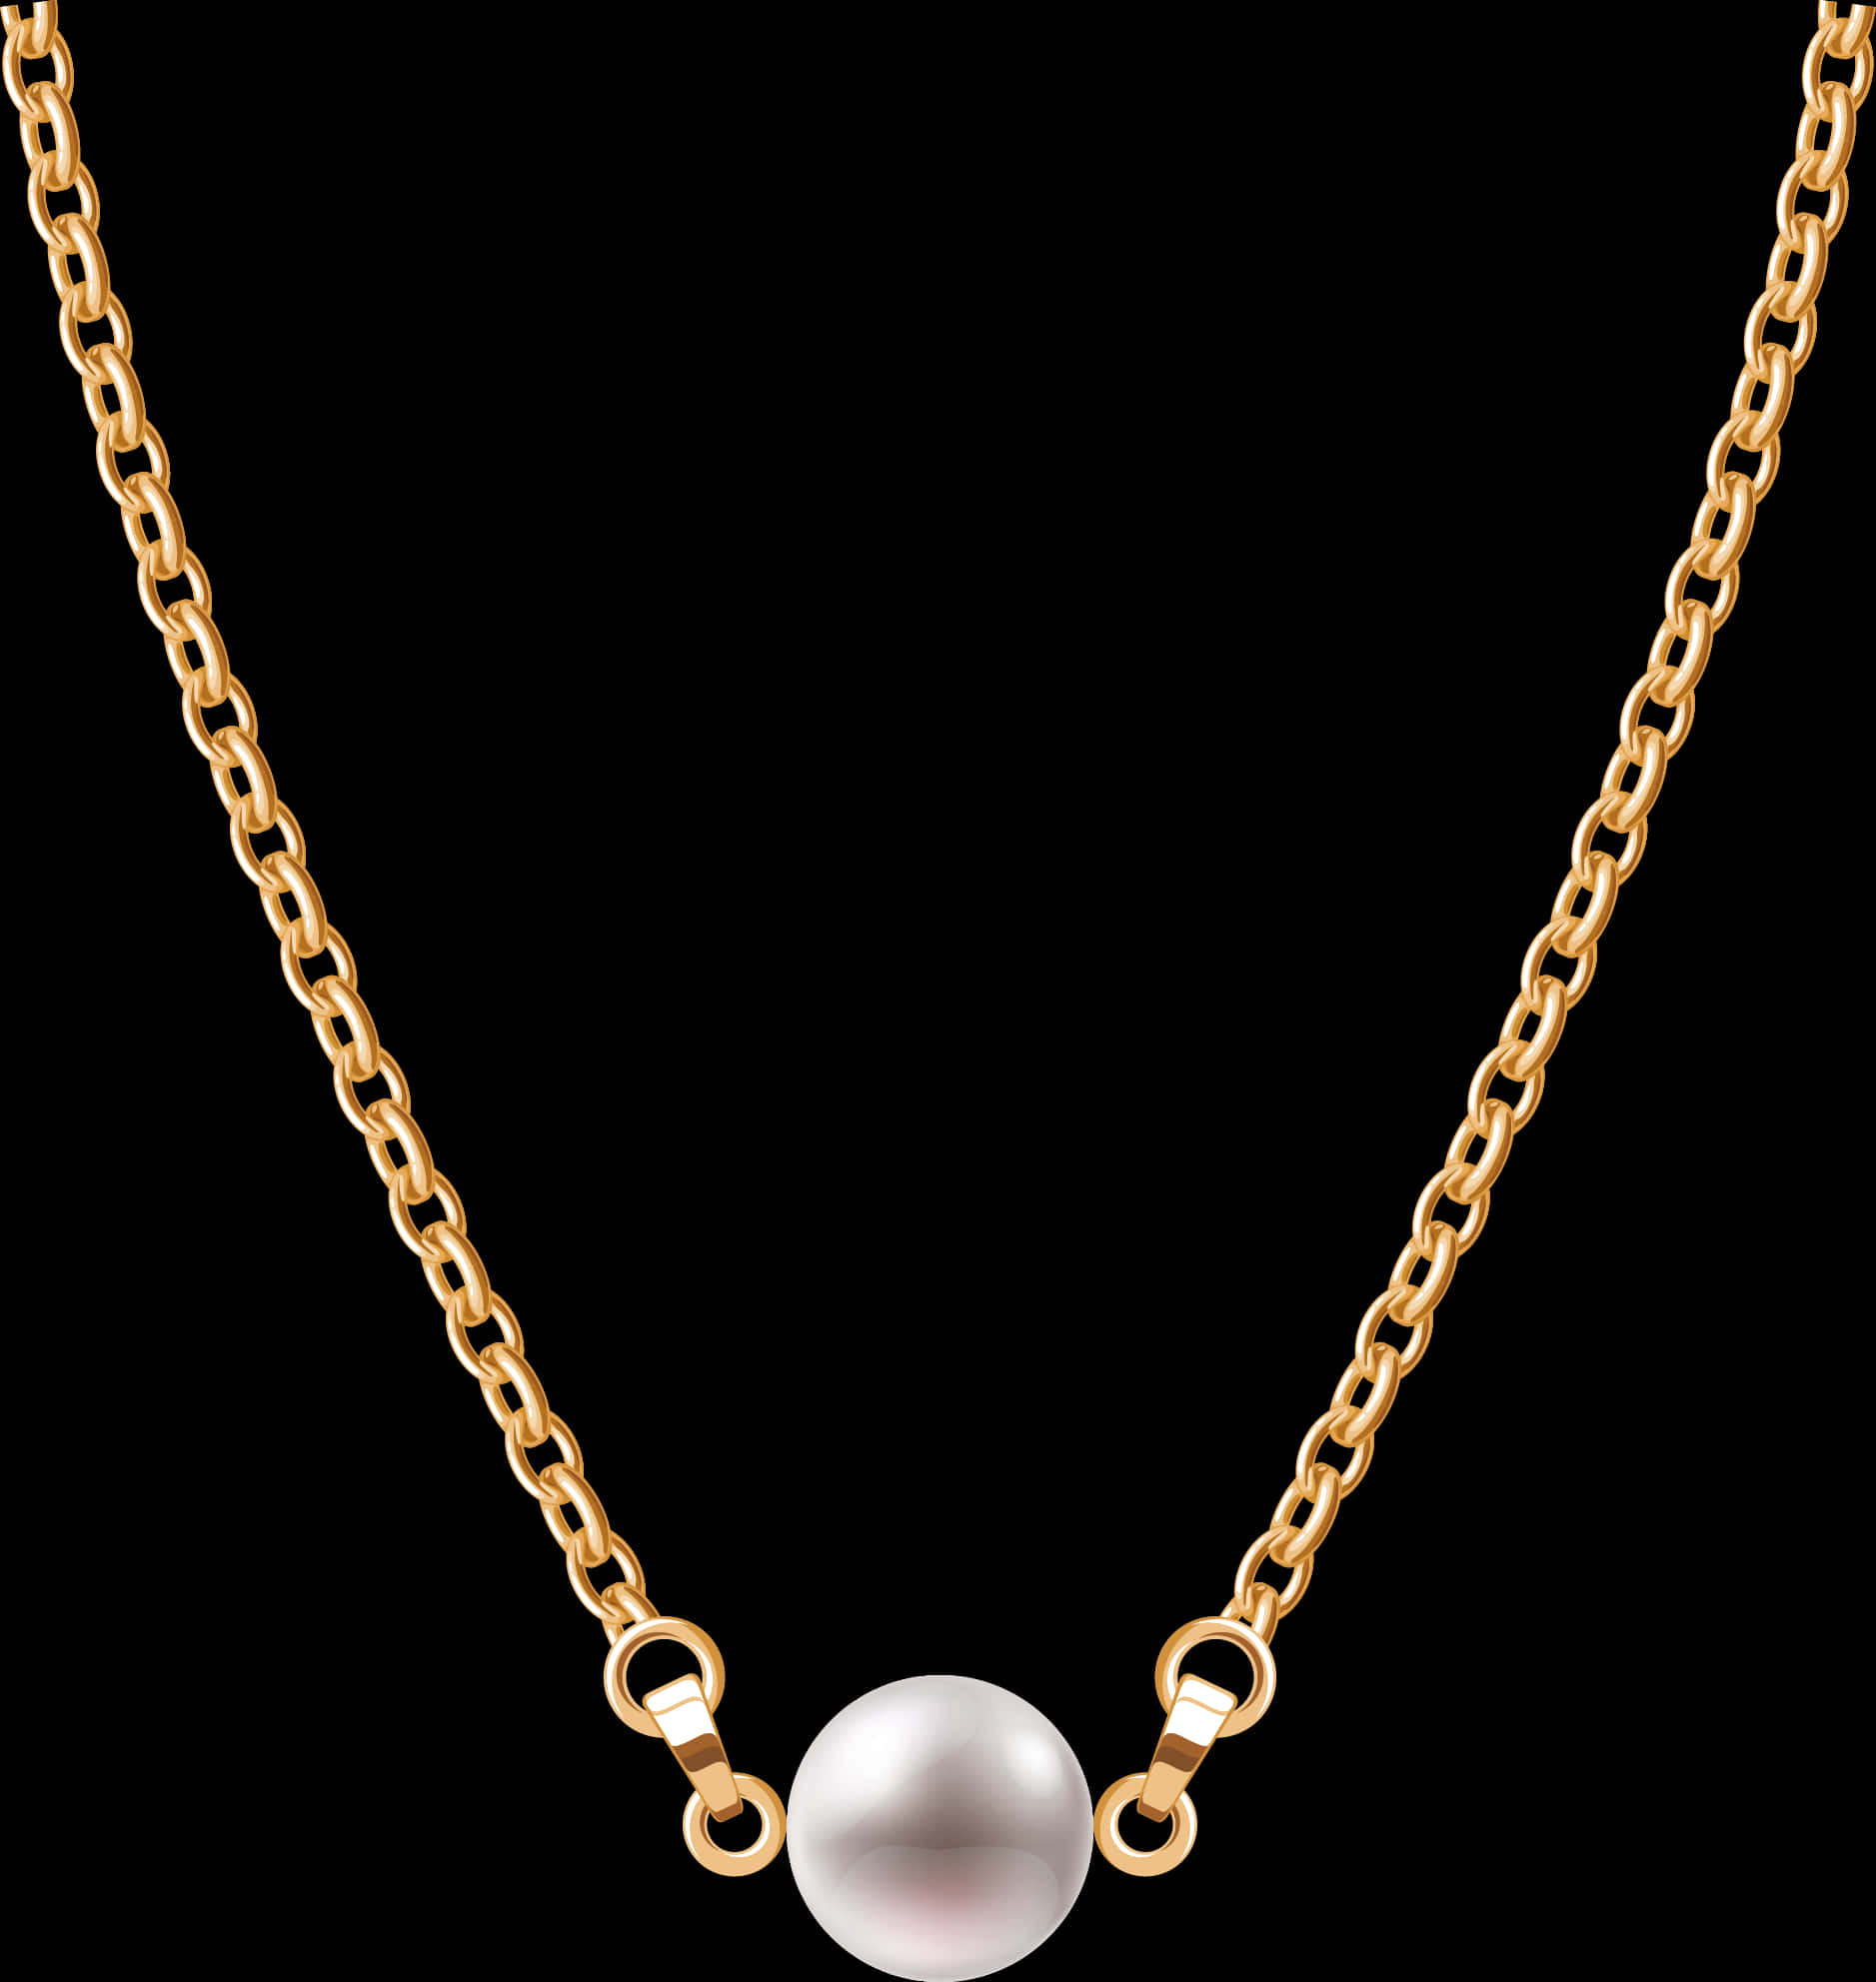 Elegant Gold Chainwith Pearl Pendant PNG